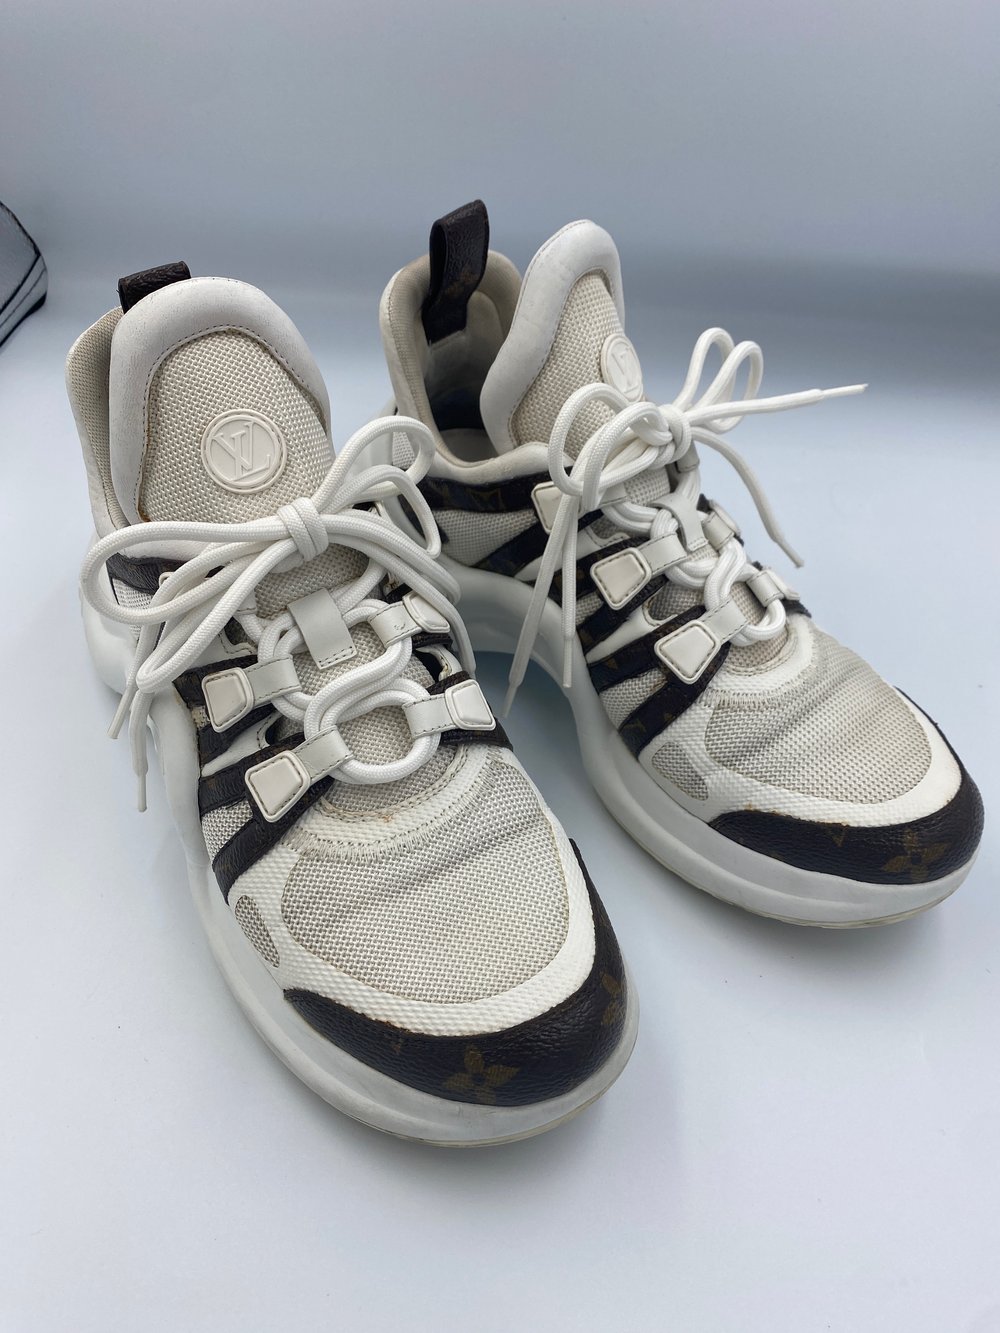 Archlight leather trainers Louis Vuitton Grey size 37.5 EU in